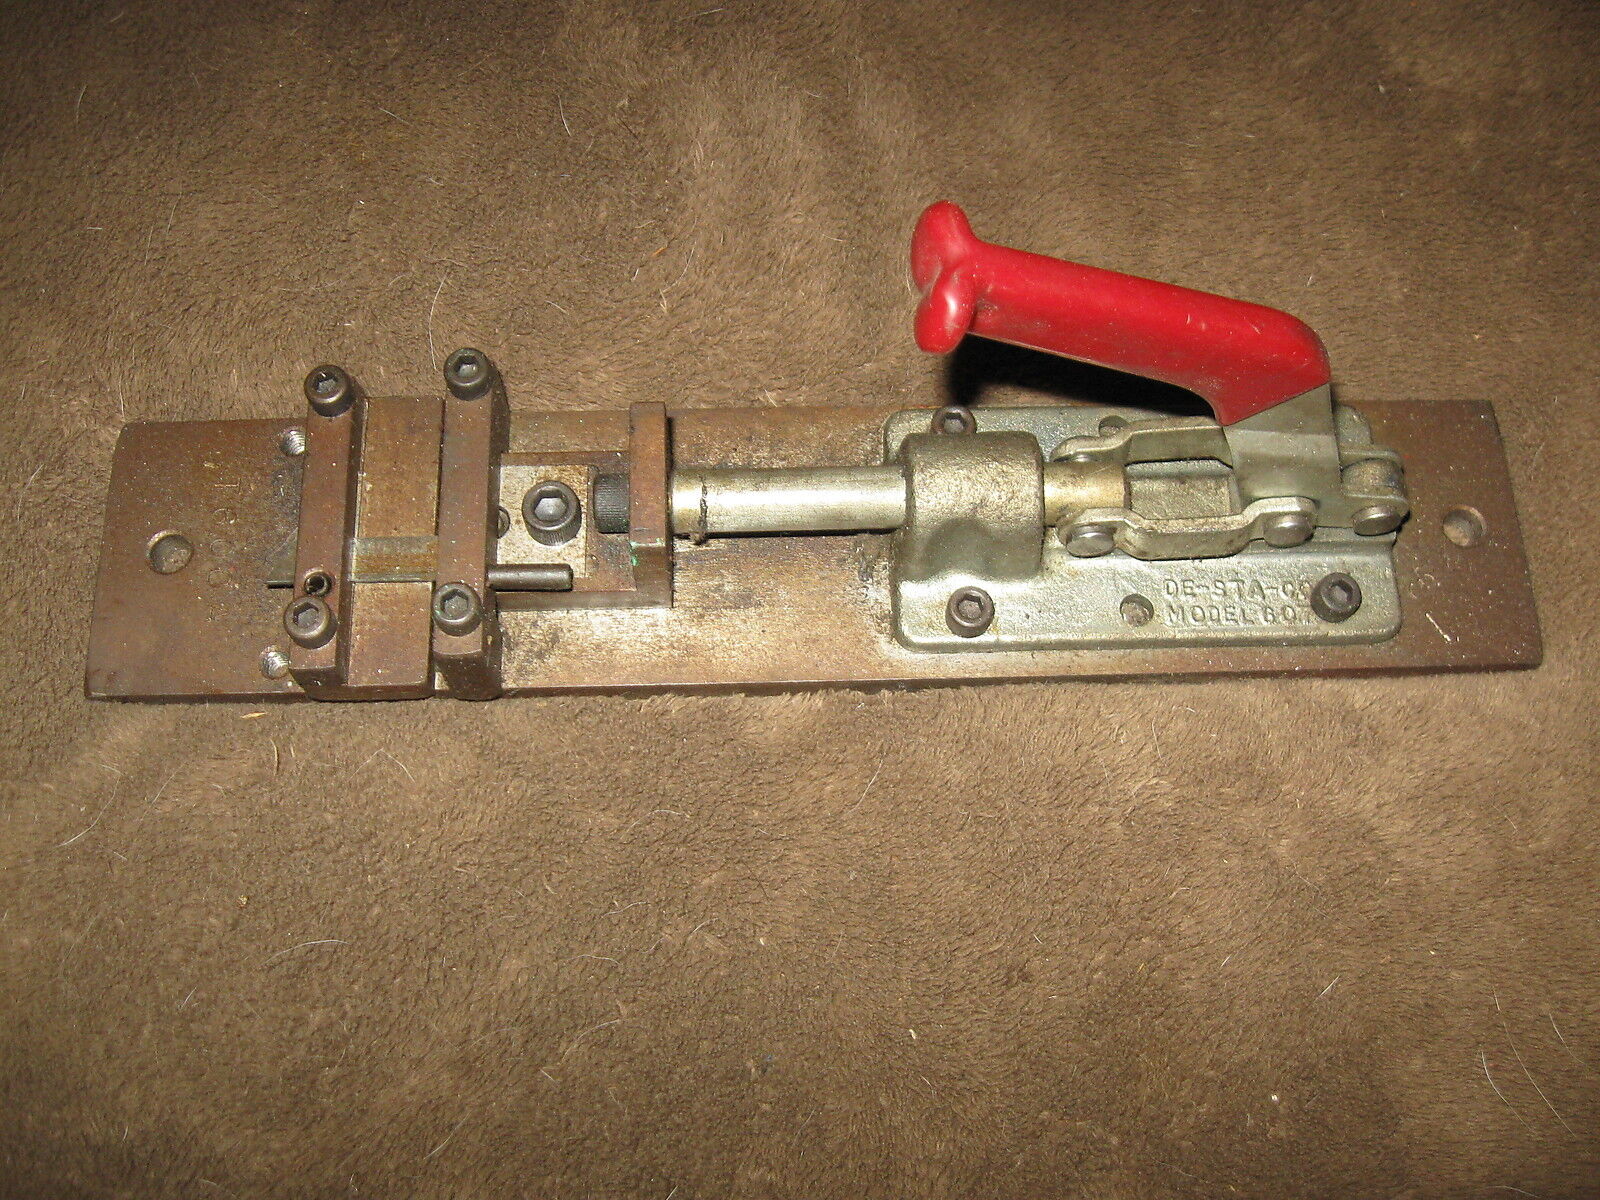 Fabulous Vintage DE-STA-CO Model 80 Clamping/Cutting/Perforating Tool - LOOK